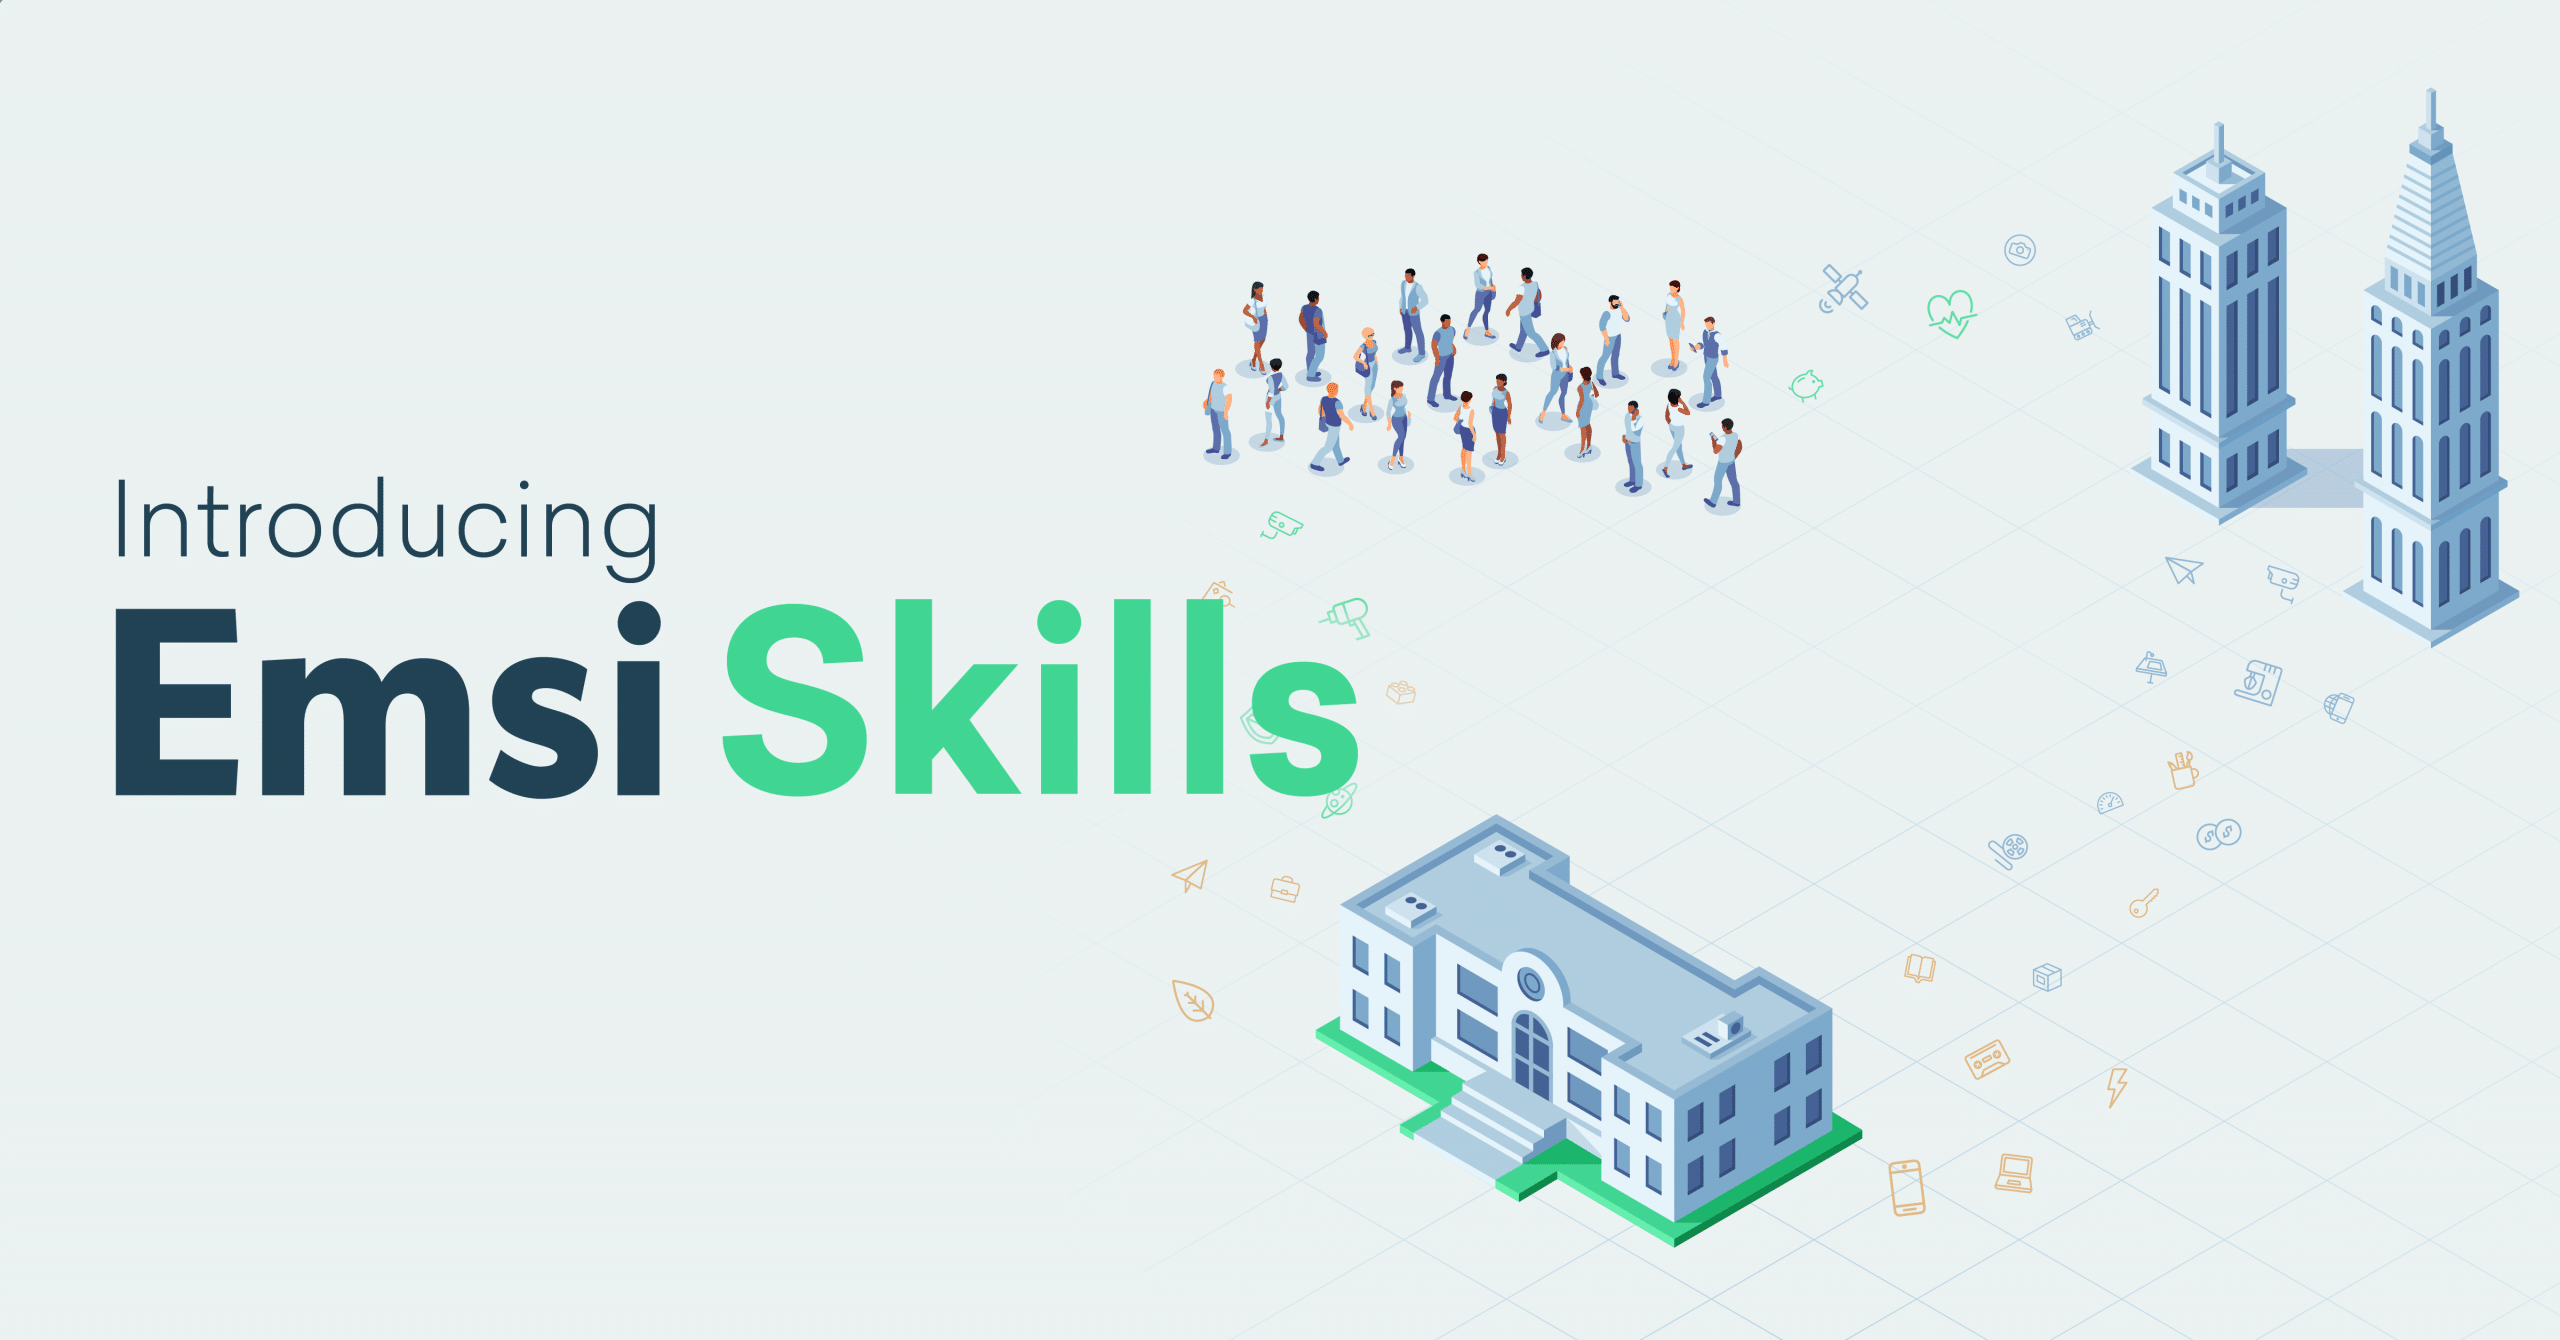 Emsi Skills: A new language for employers, educators, and students